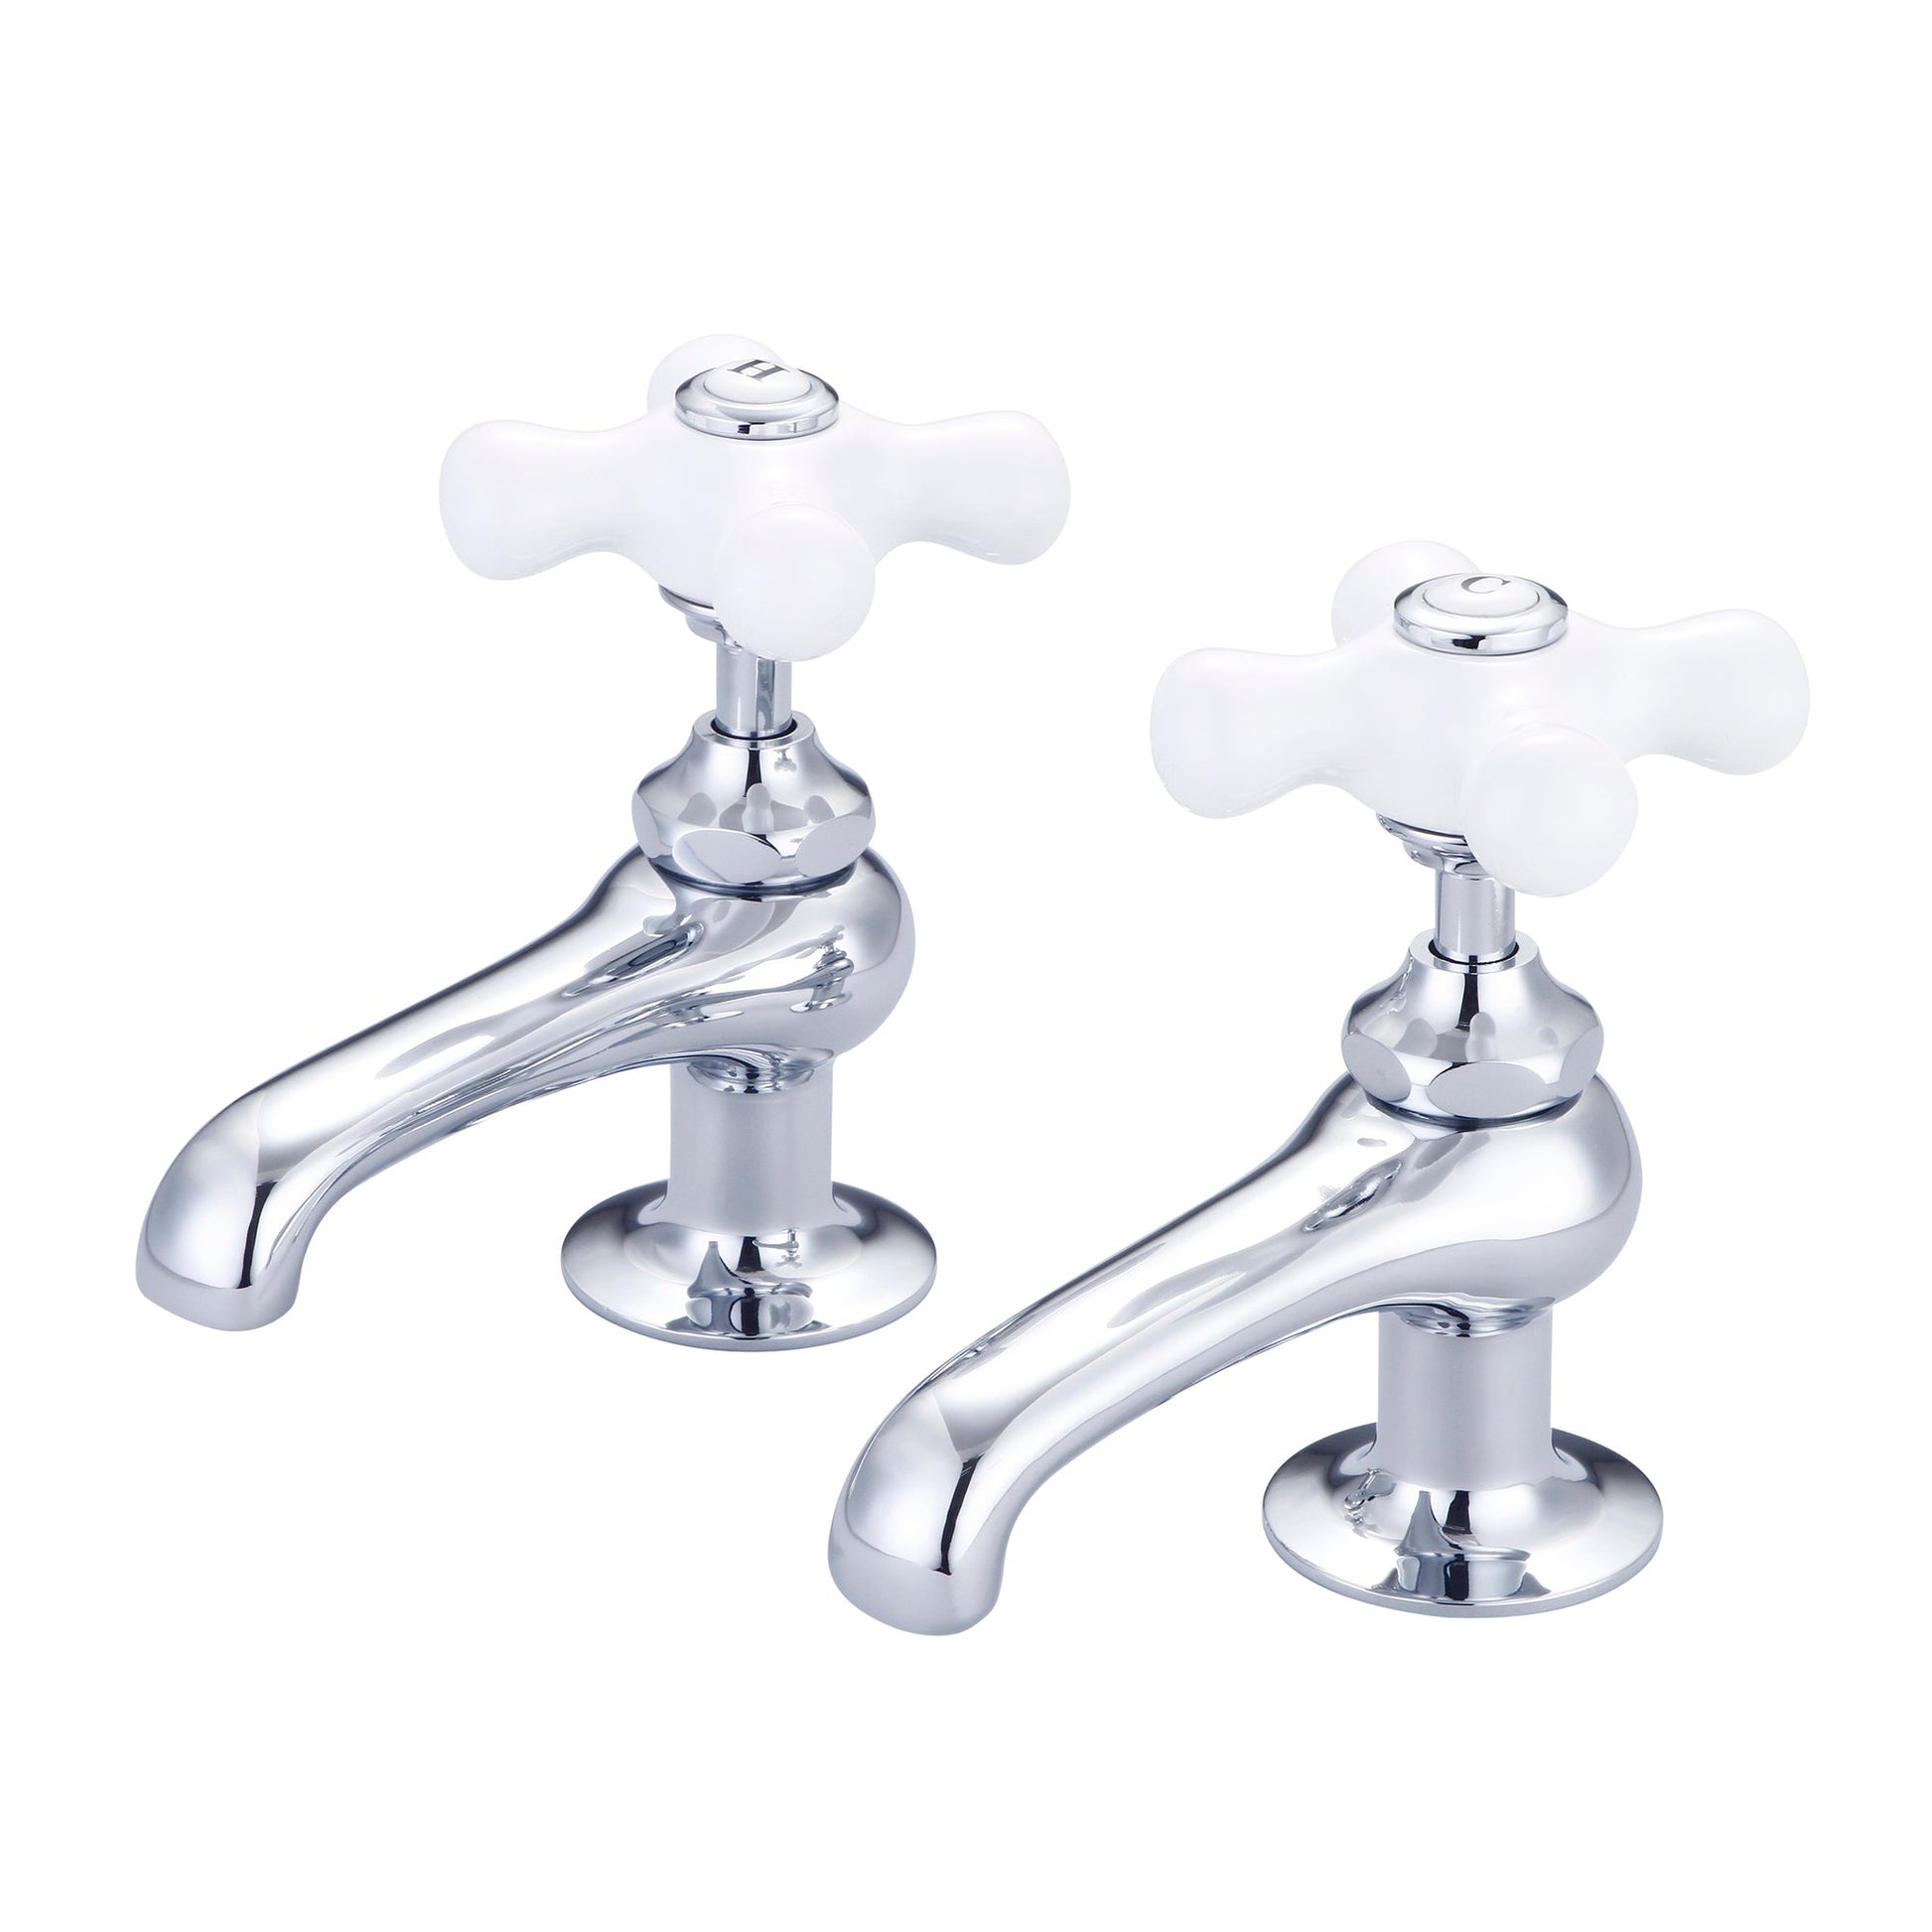 Water Creation Vintage Classic Basin Cocks Lavatory F1-0003 1.88" Silver Solid Brass Faucet With Porcelain Cross Handles, Hot And Cold Labels Included